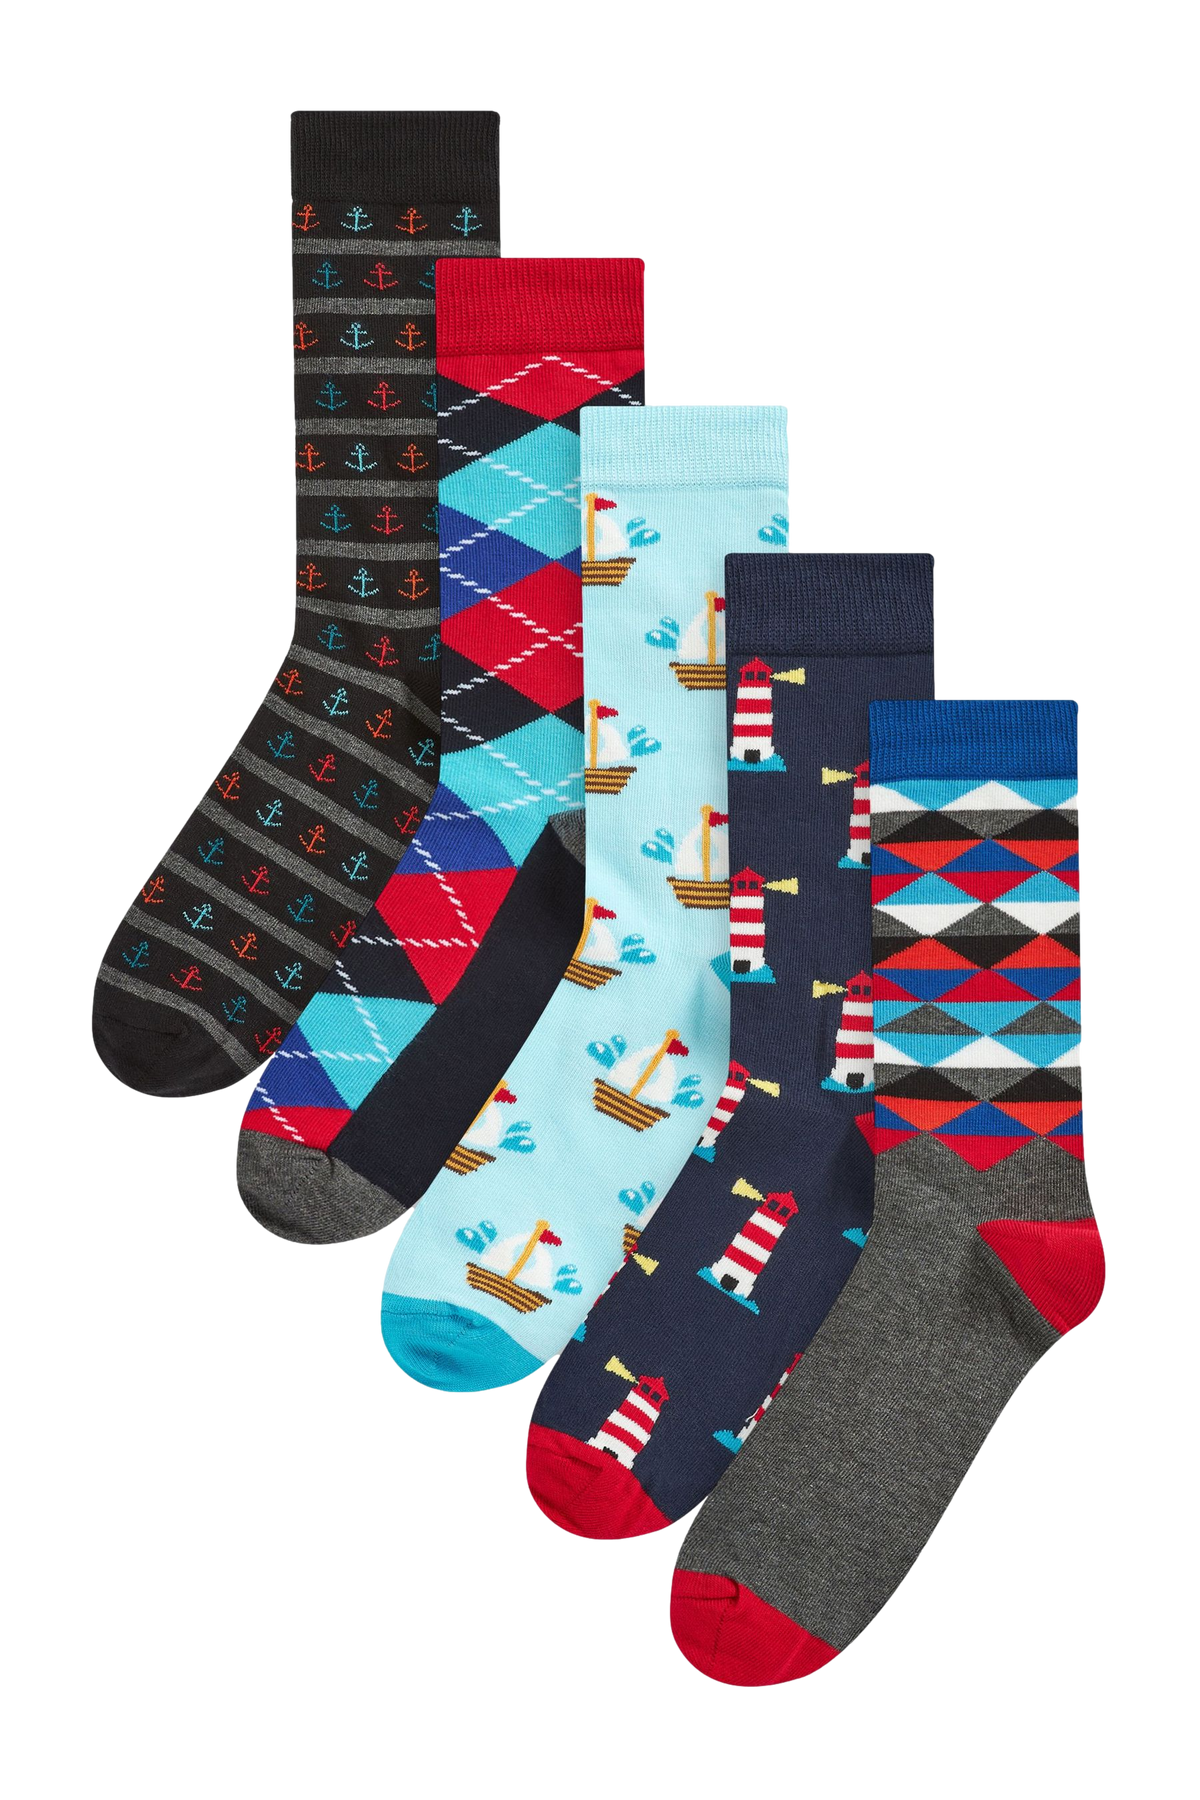 HS by Happy Socks 5 Pack Nautical and Argyle Designs 